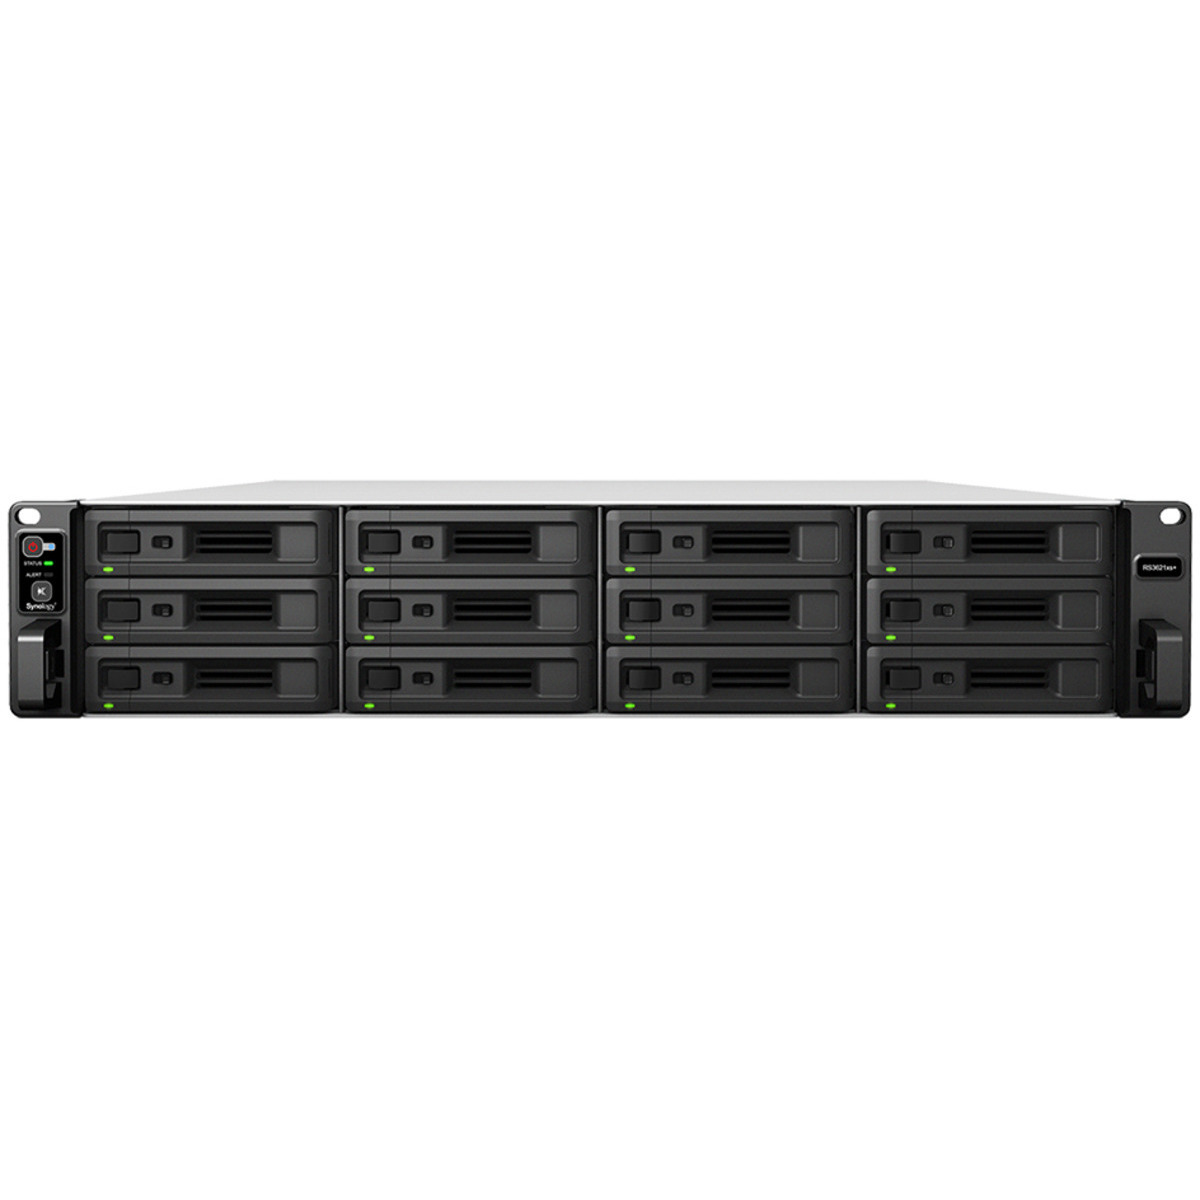 Synology RackStation RS3621xs+ 120tb 12-Bay RackMount Large Business / Enterprise NAS - Network Attached Storage Device 12x10tb Western Digital Ultrastar DC HC330 WUS721010ALE6L4 3.5 7200rpm SATA 6Gb/s HDD ENTERPRISE Class Drives Installed - Burn-In Tested RackStation RS3621xs+